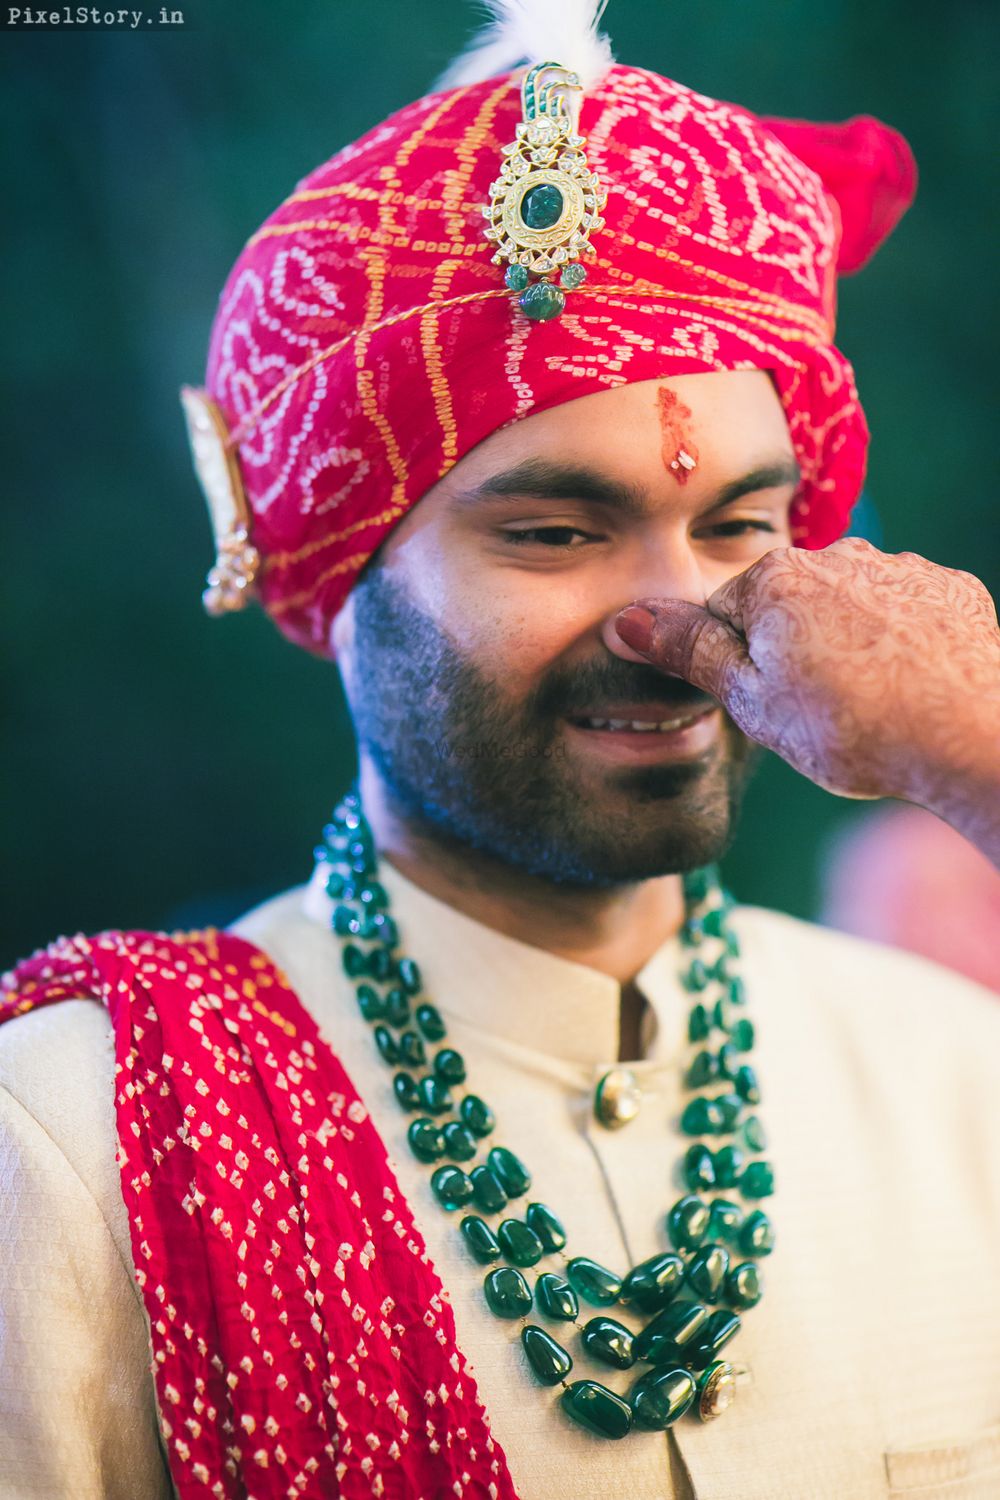 Photo From A Royal Rajasthani Wedding at Ramoji Filmcity - By Pixelstory.in